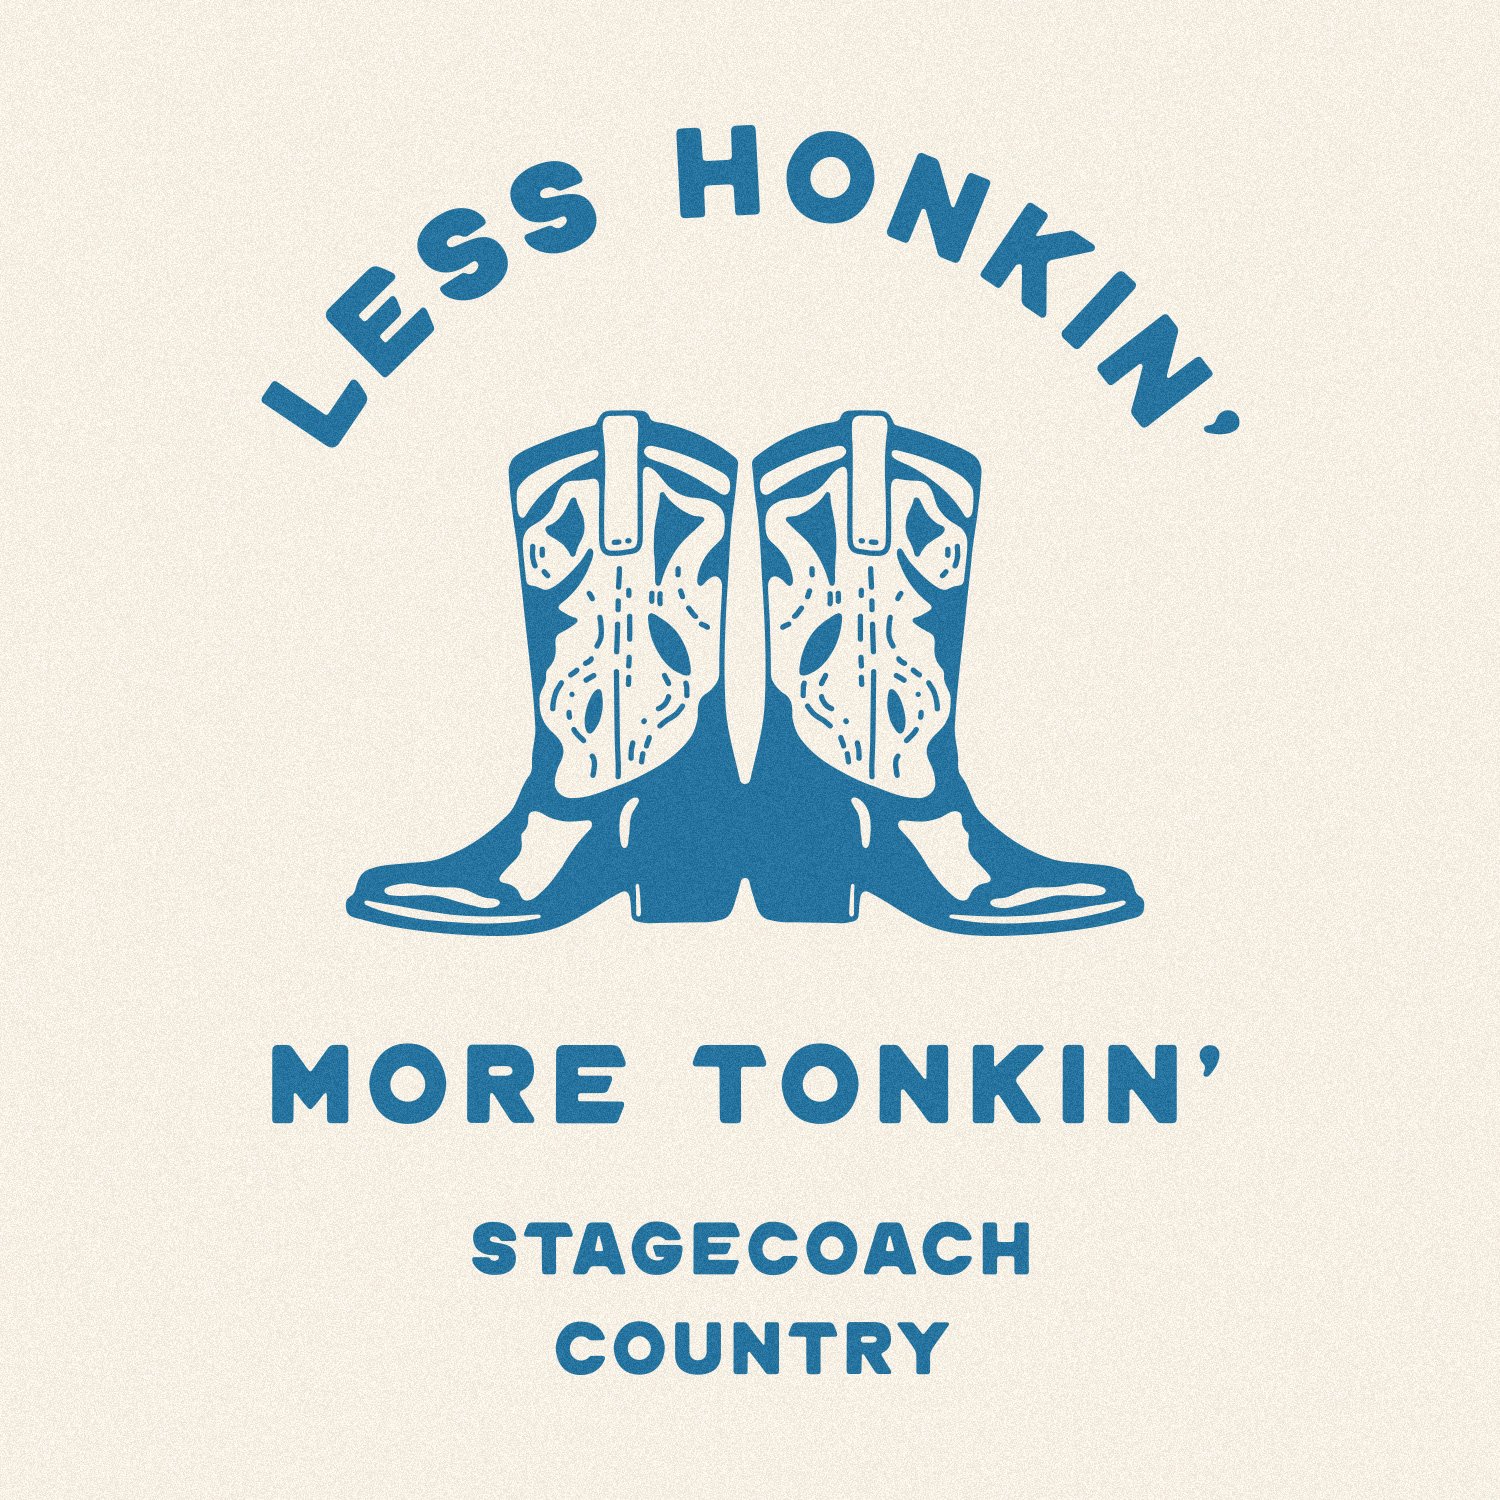  Less honkin’ more tonkin’ boots merch illustration for Stagecoach Music festival, design by Cactus Country. 